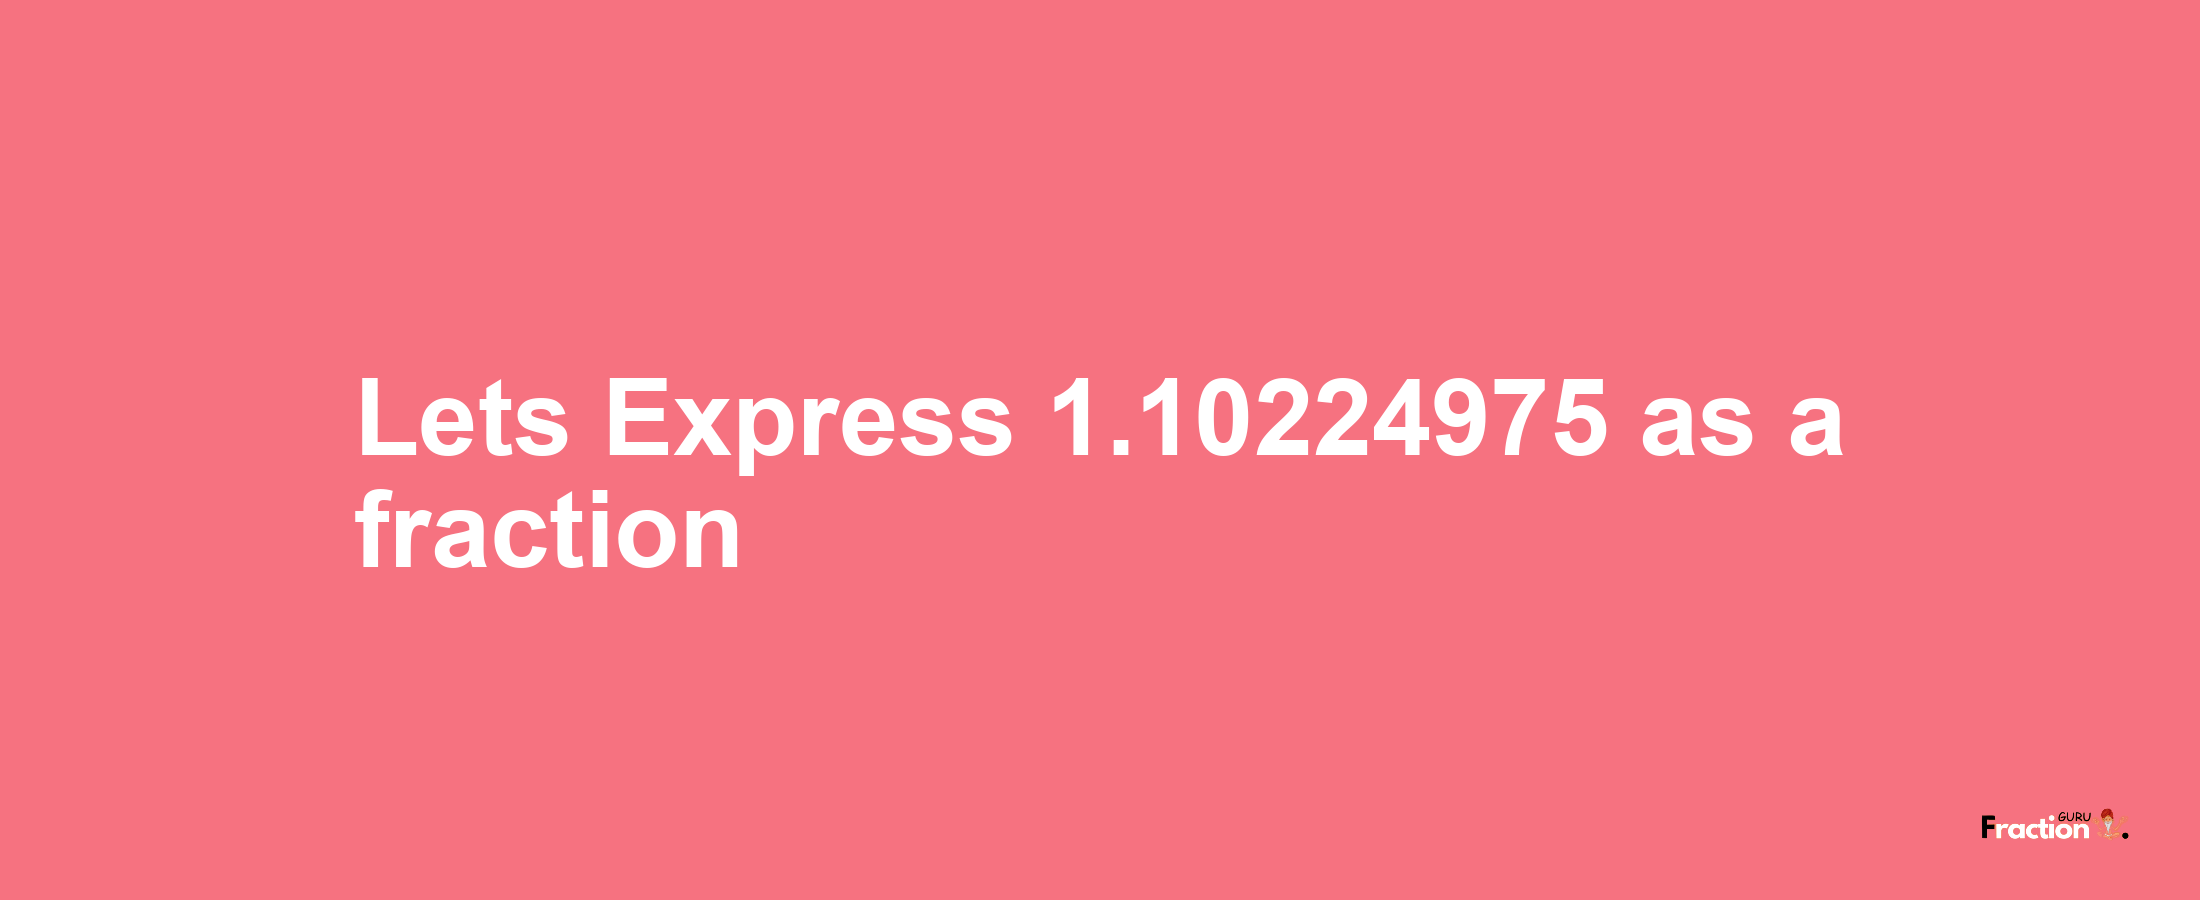 Lets Express 1.10224975 as afraction